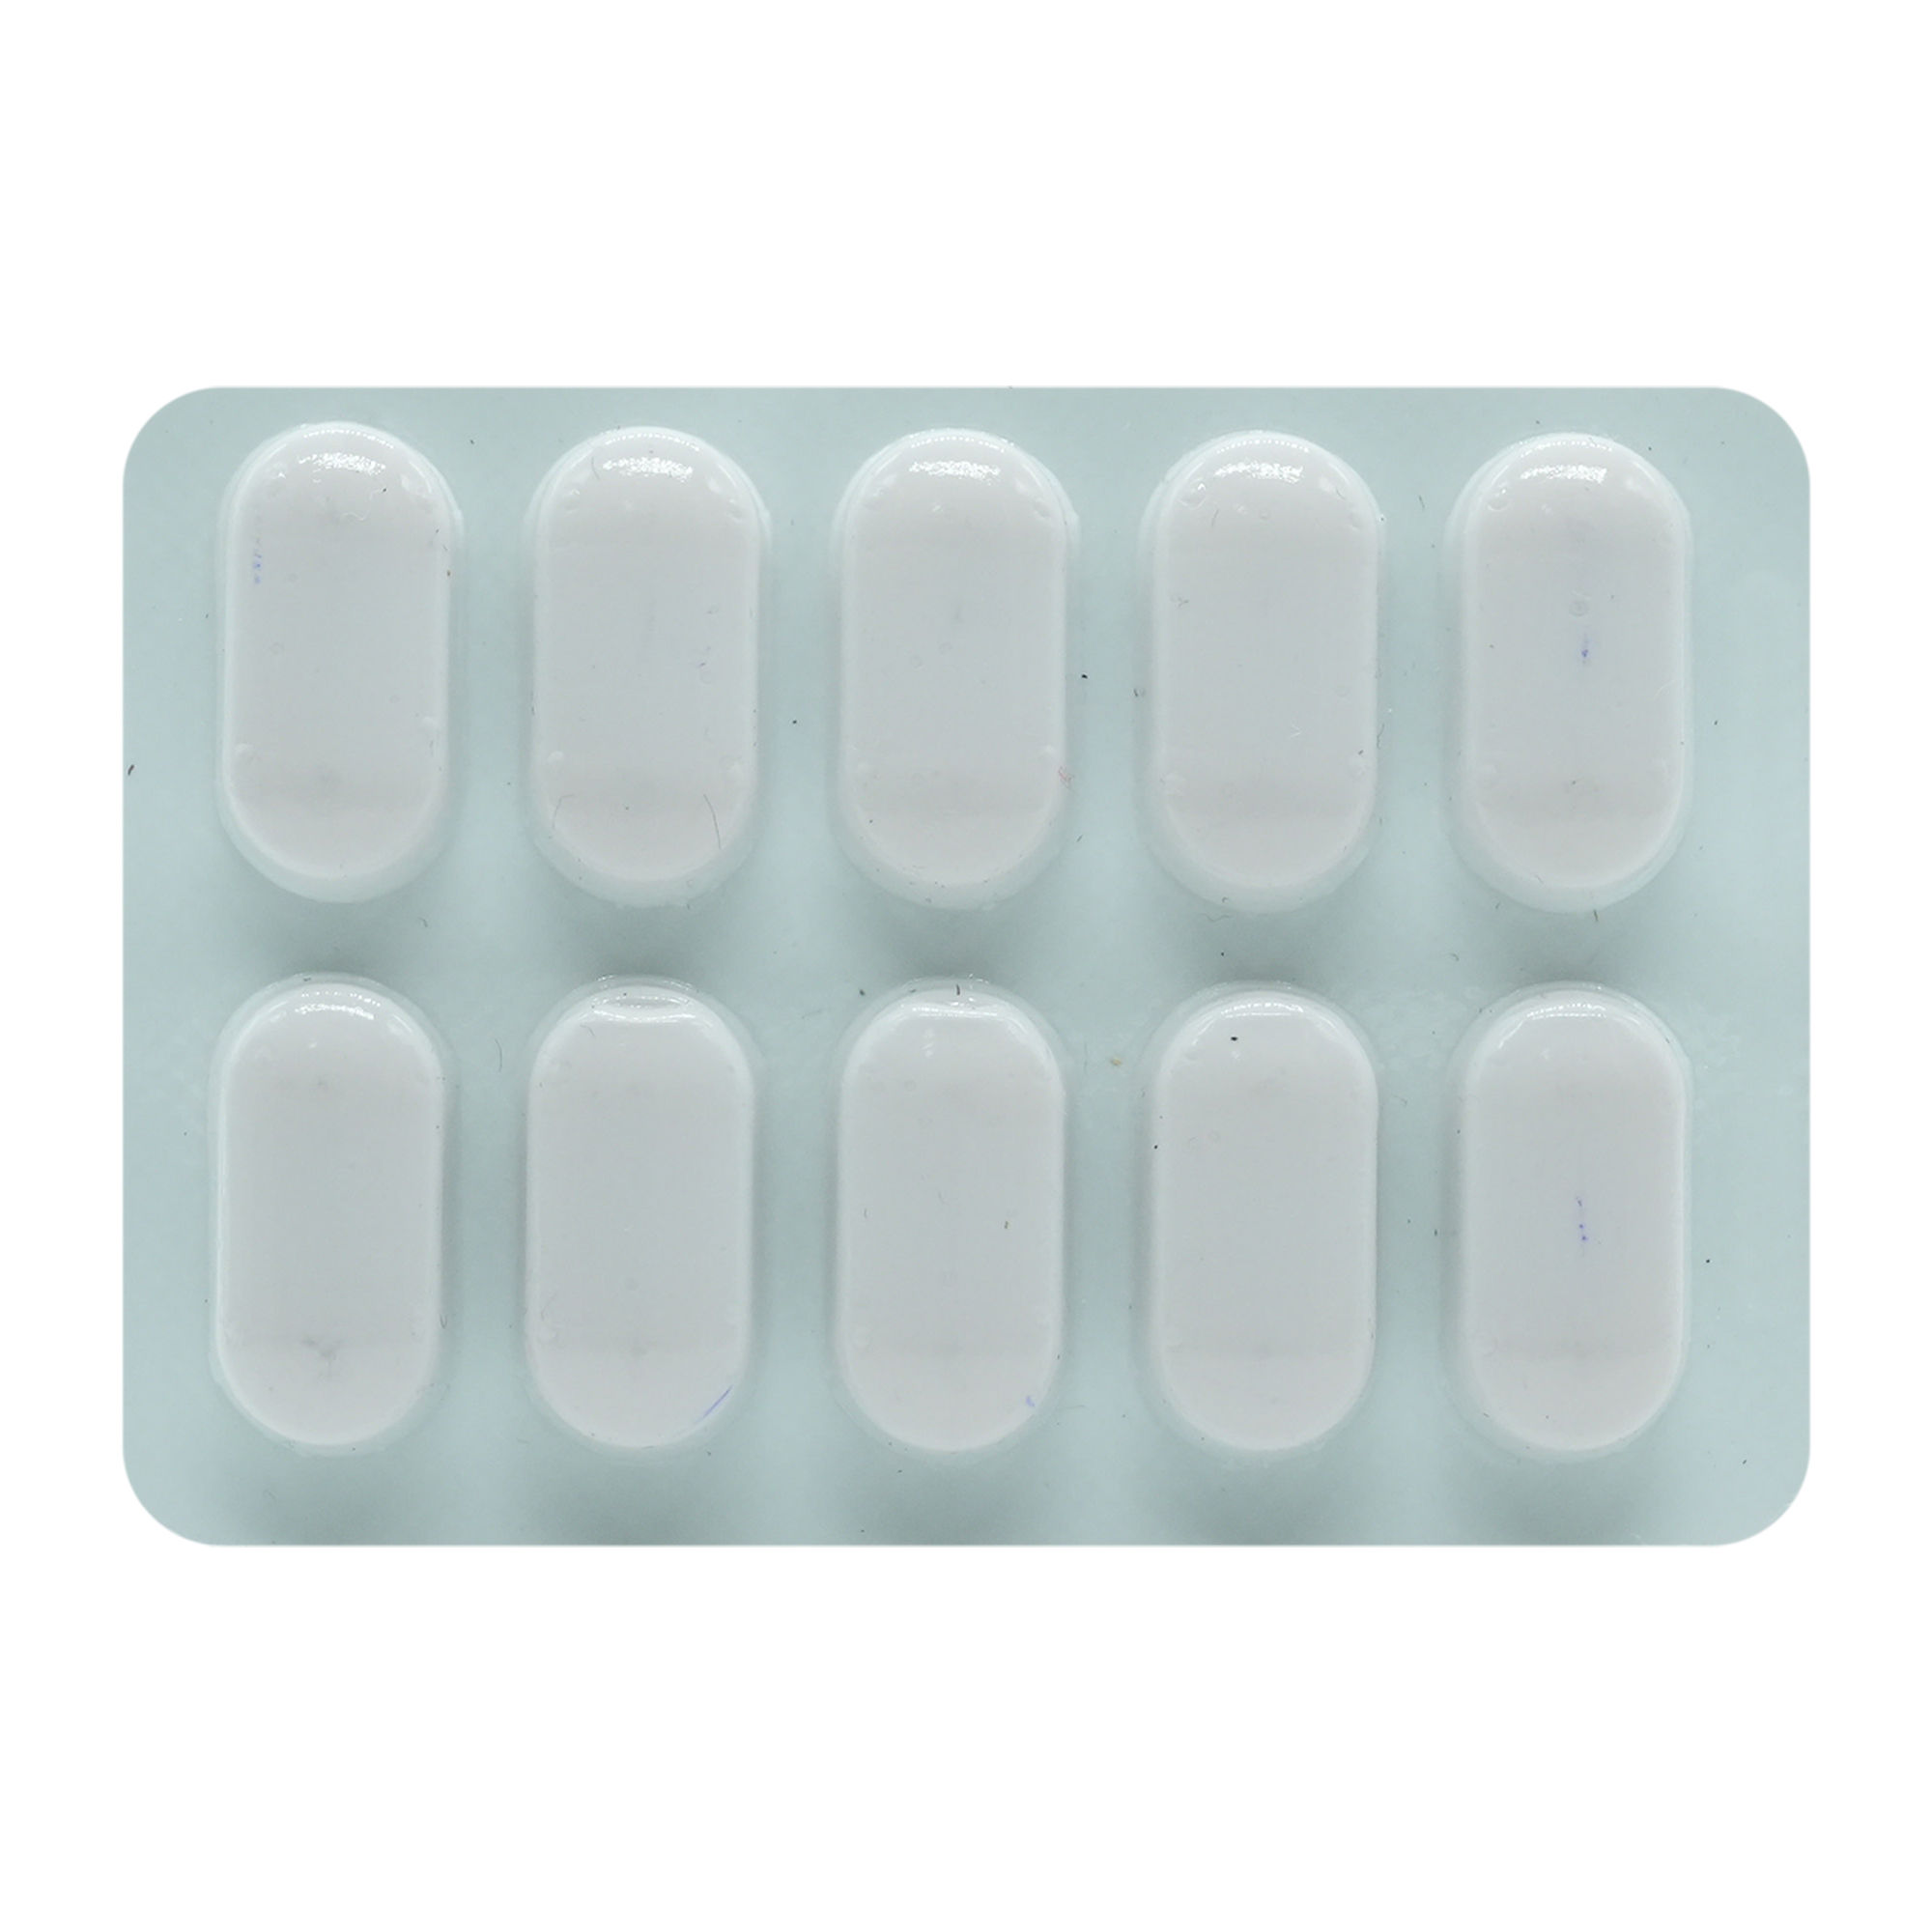 Sitasafe-M 50/500 Tablet 10's Price, Uses, Side Effects, Composition ...